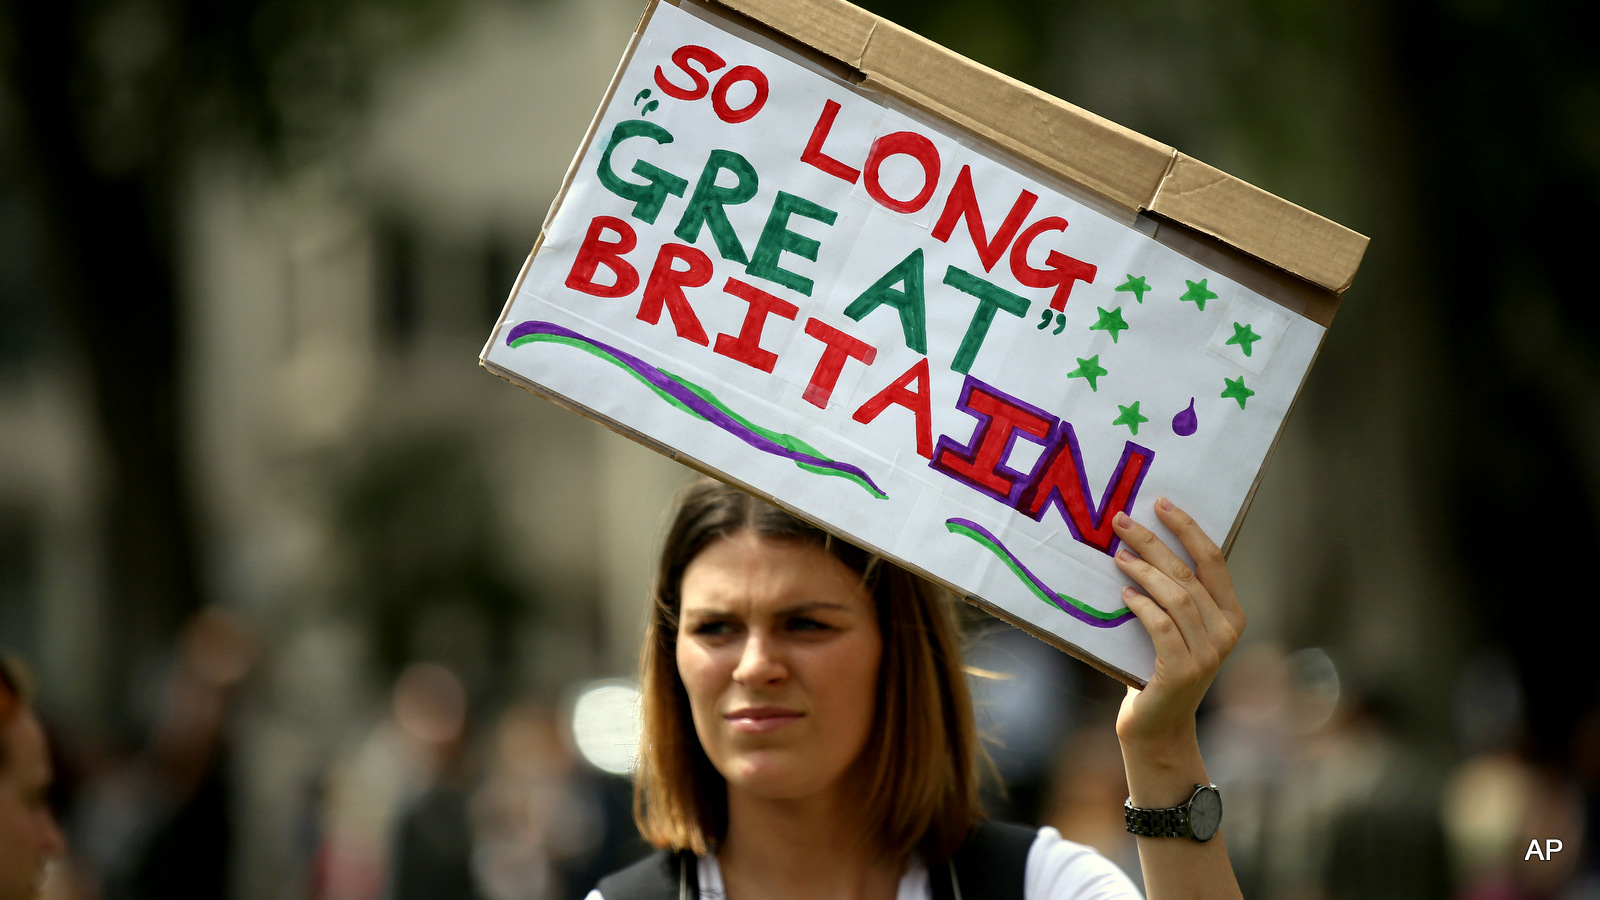 Demonstrators opposing Britain's exit from the European Union in Parliament Square following an EU referendum result hold a protest in London, Saturday, June 25, 2016. According to the Muslim Council for Britain (MCB) there have been more than 100 reports of 'hate crimes' against Muslims since the Brexit result.